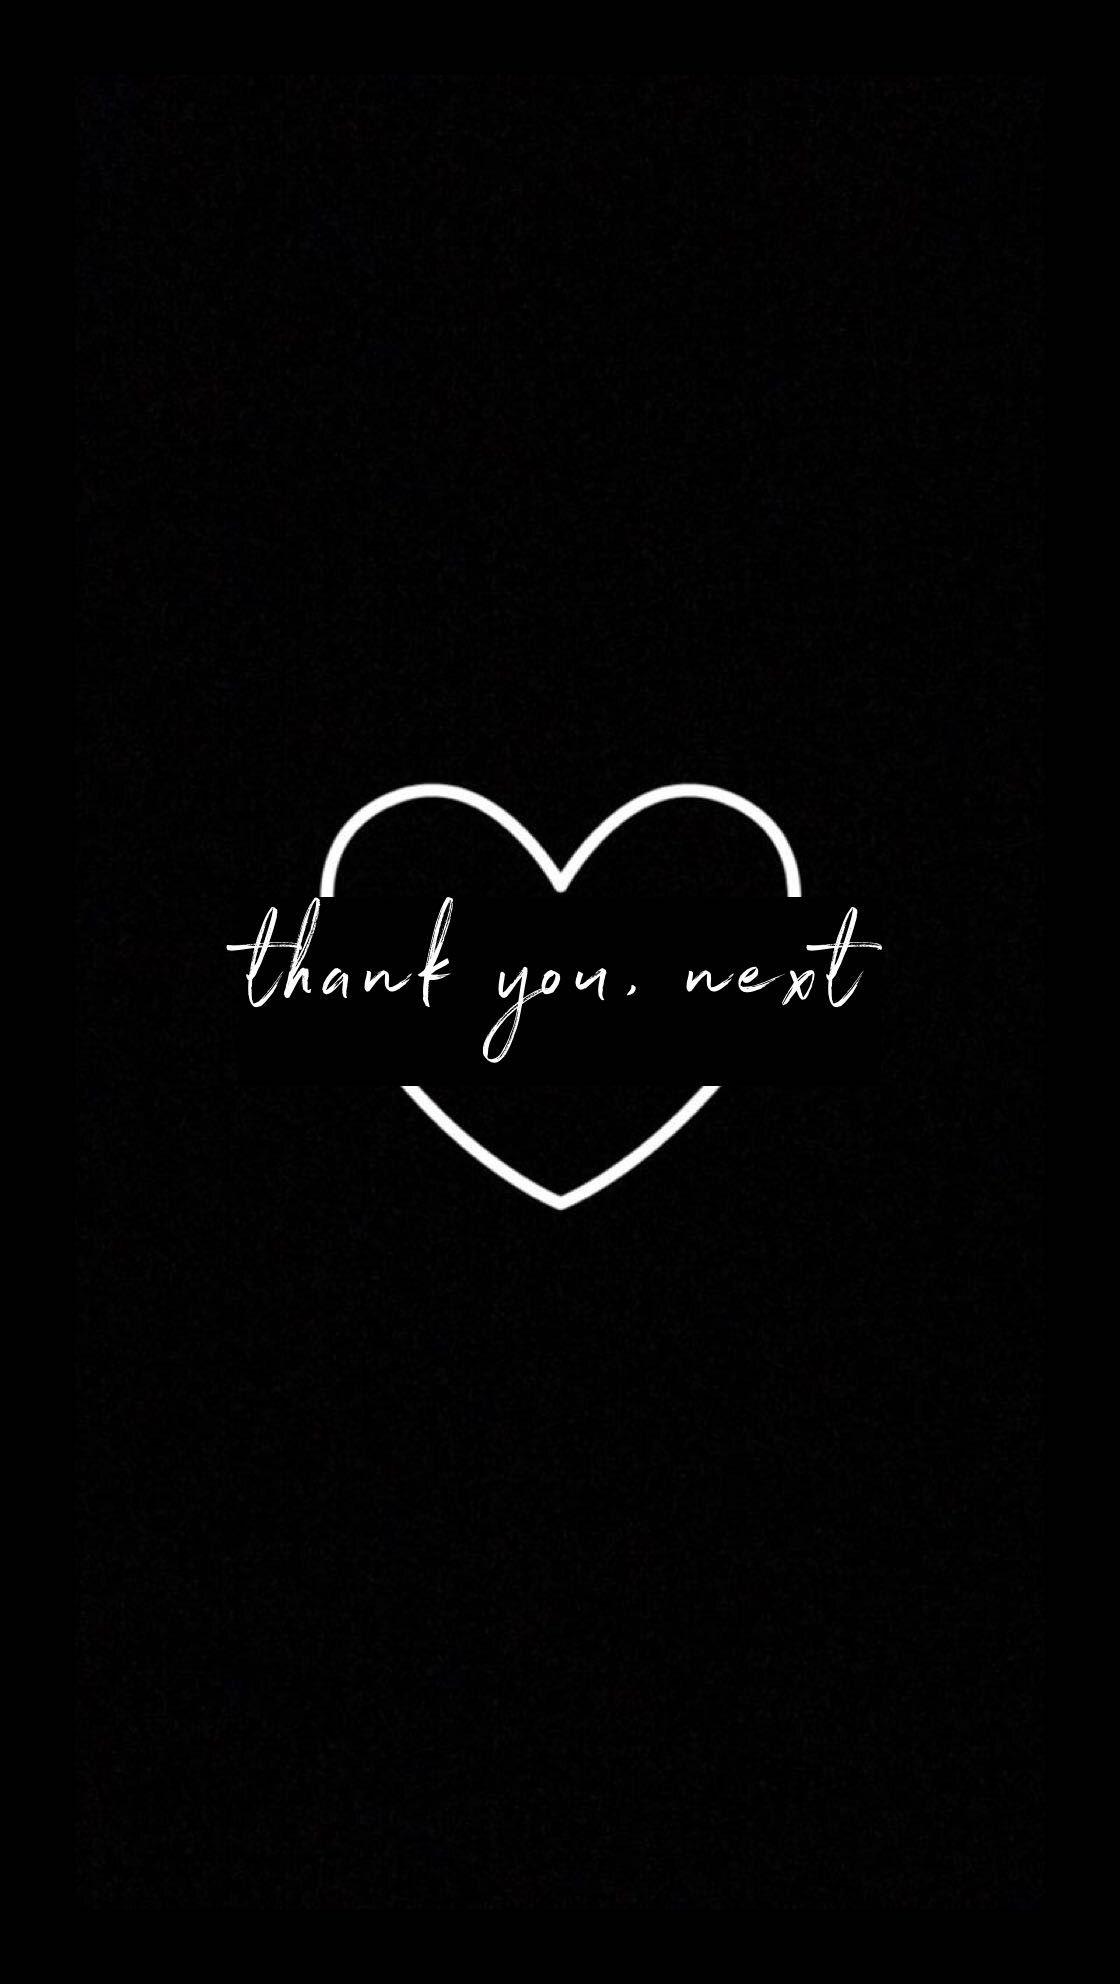 Thank you, next. Wallpaper quotes, iPhone wallpaper